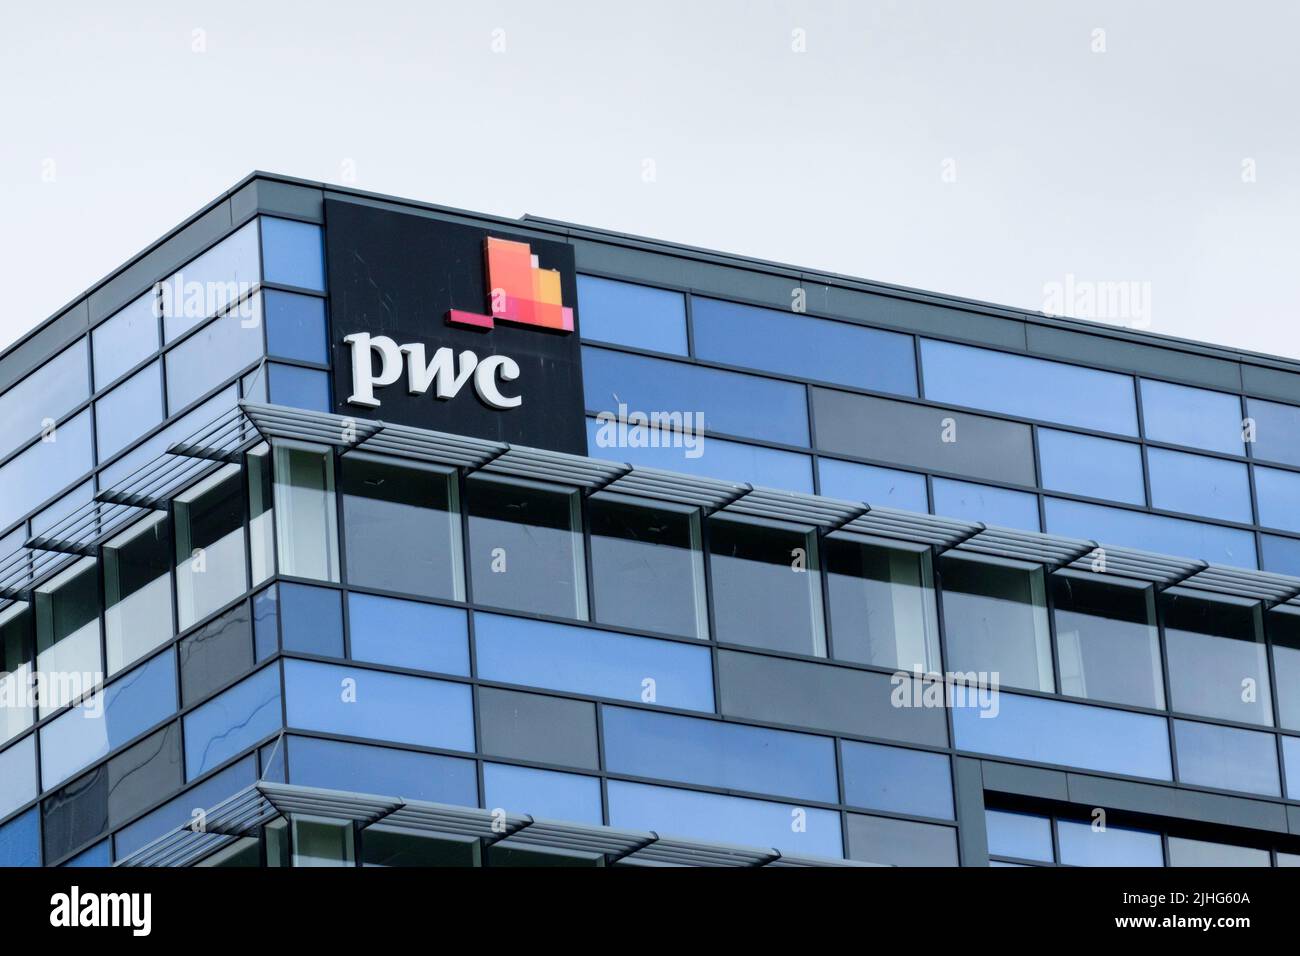 The PWC building at Glass Wharf, Temple Quay Bristol UK Stock Photo